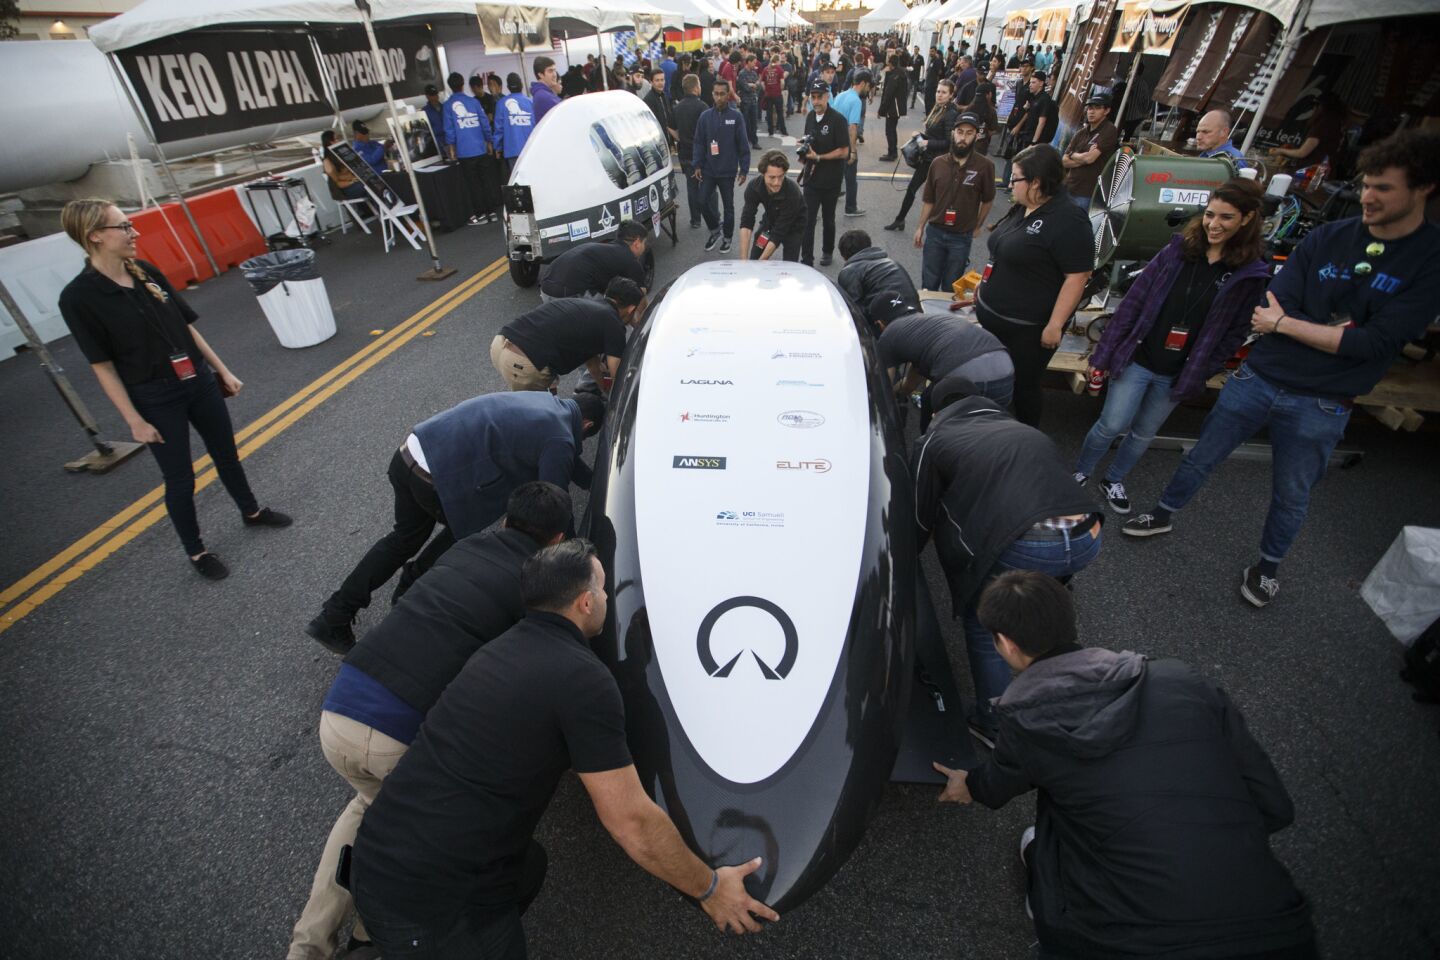 UC Irvine "UCI HyperXite" team members push their pod during the Hyperloop Pod Competition by SpaceX in Hawthorne. College students worldwide competed to test their pods on a Hyperloop track that runs three-quarters of a mile.